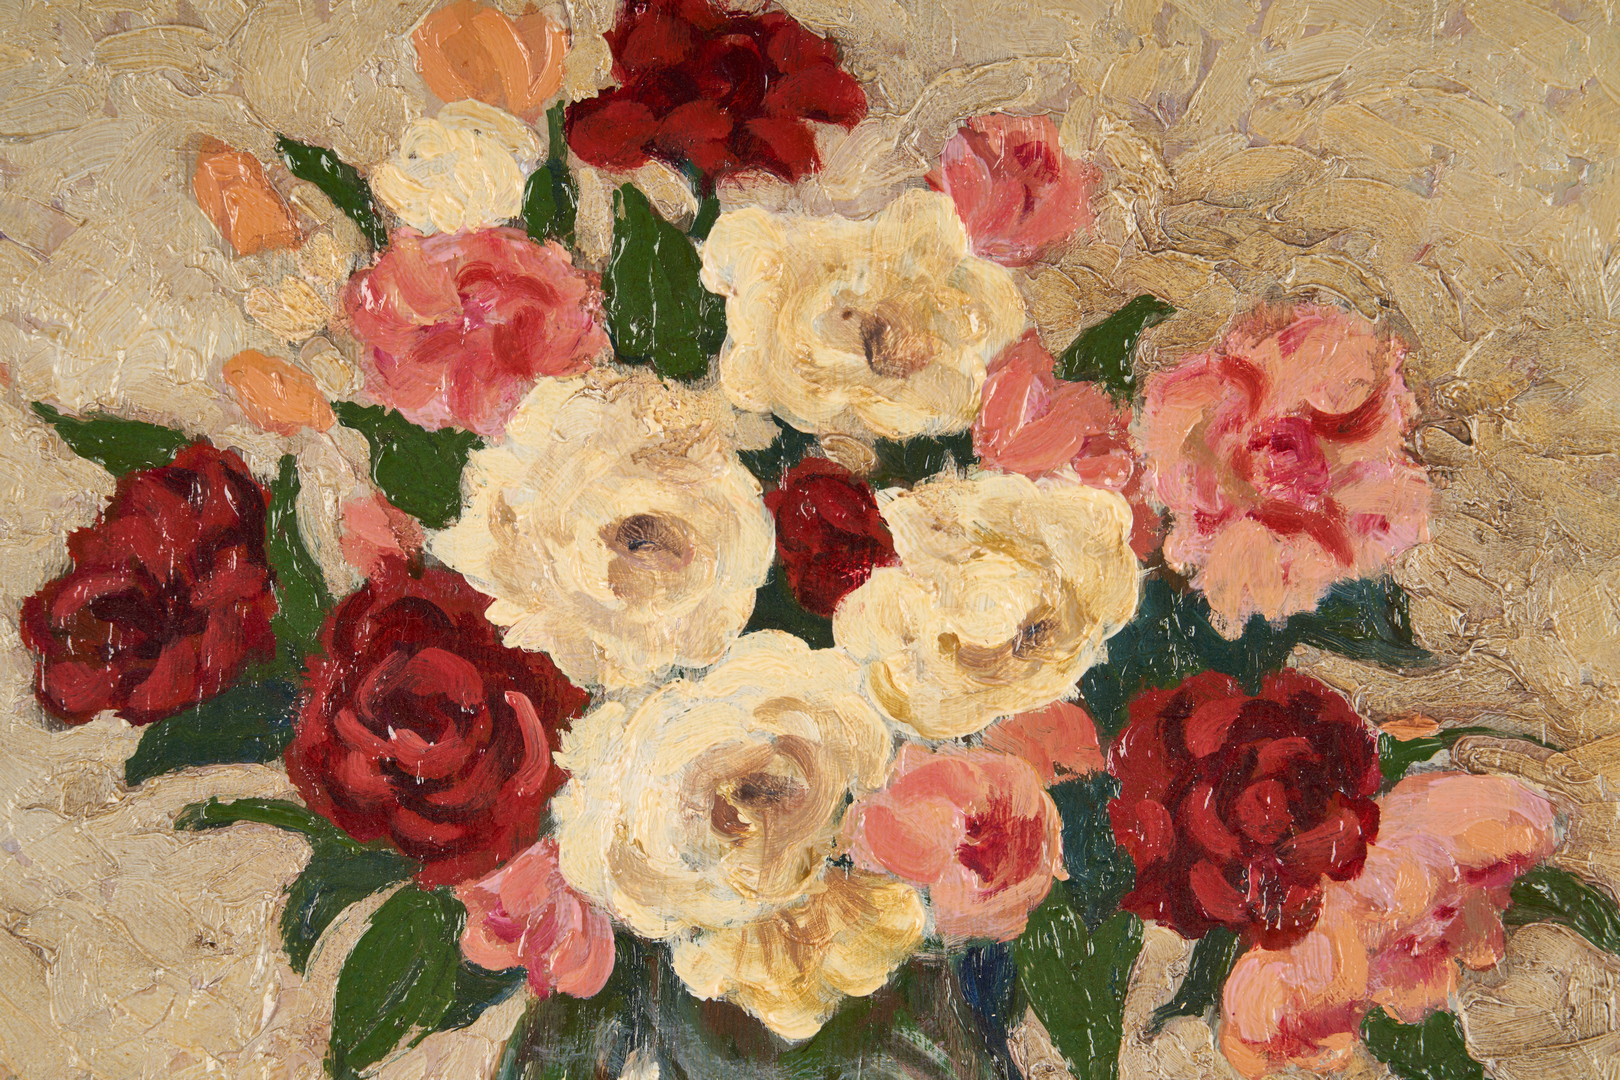 Lot 675: 2 Decorative Paintings, Abstract and Still Life